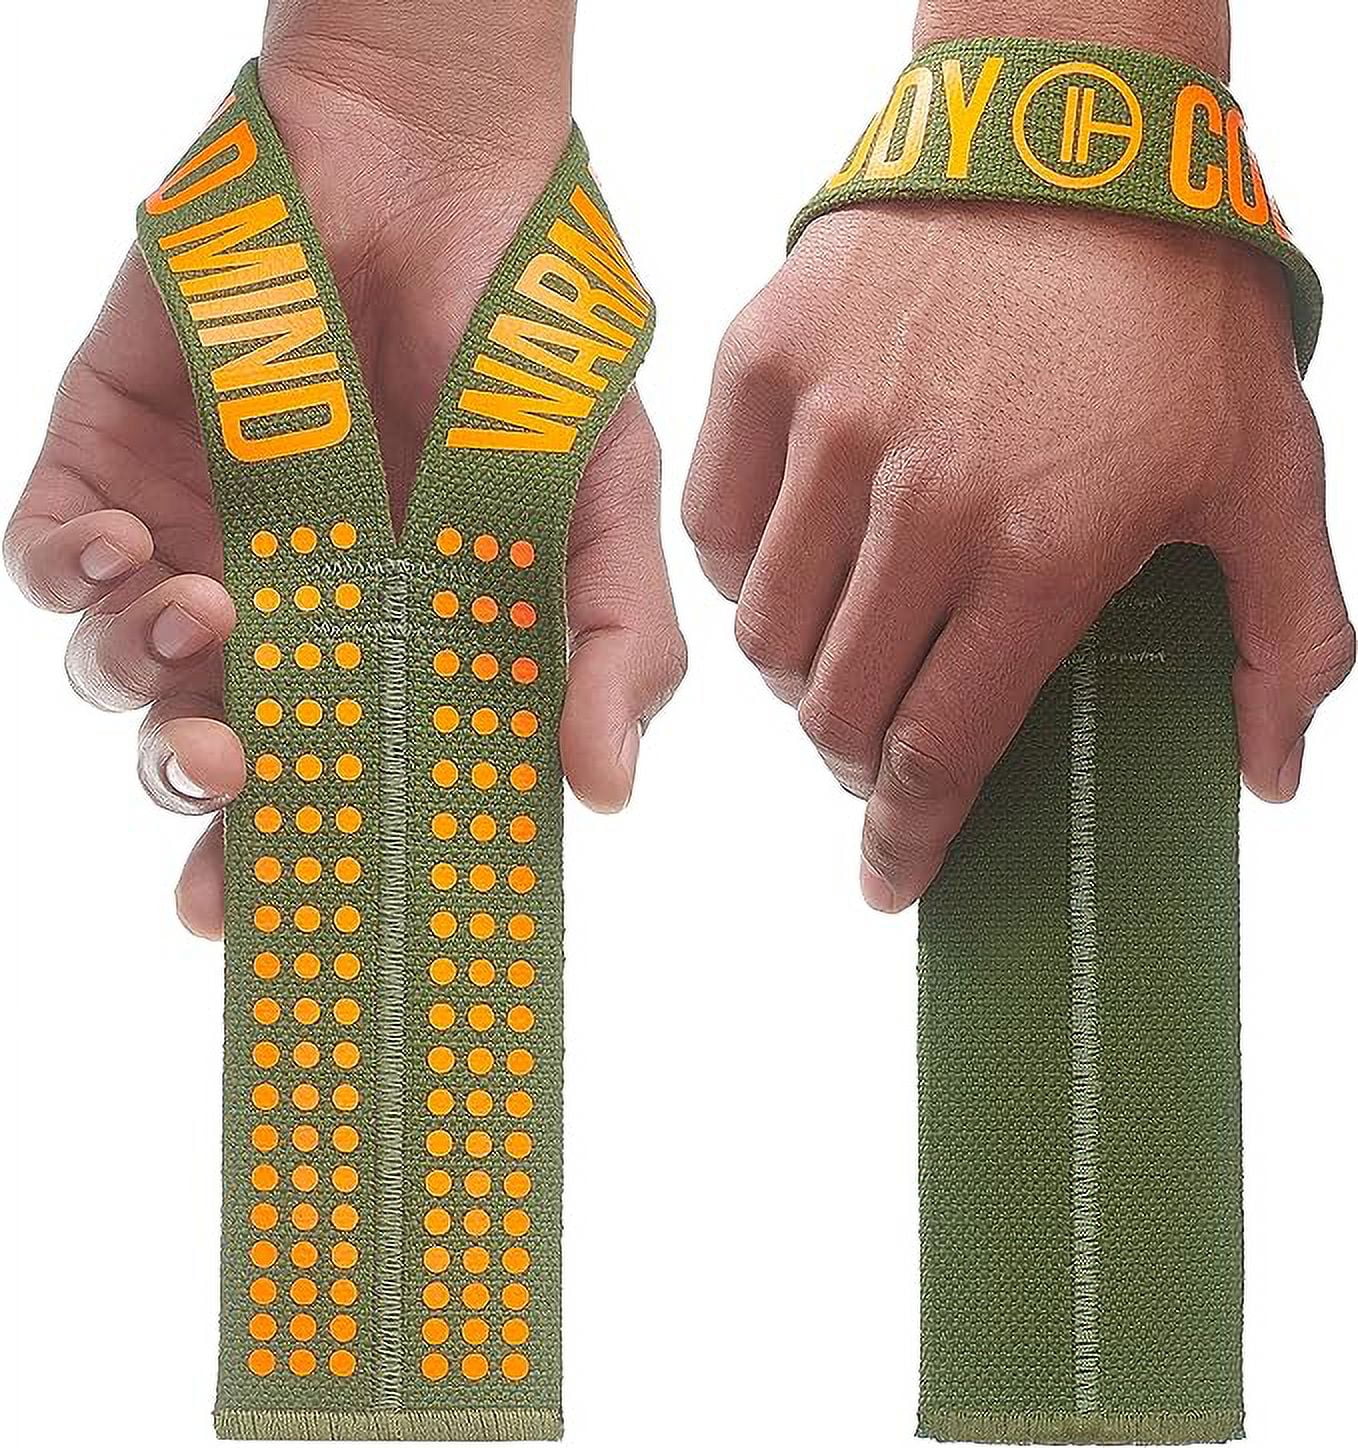 WARM BODY COLD MIND V1 Lifting Wrist Straps for Olympic Weightlifting,  Powerlifting, Bodybuilding, Functional Strength Cross Training - Heavy-Duty